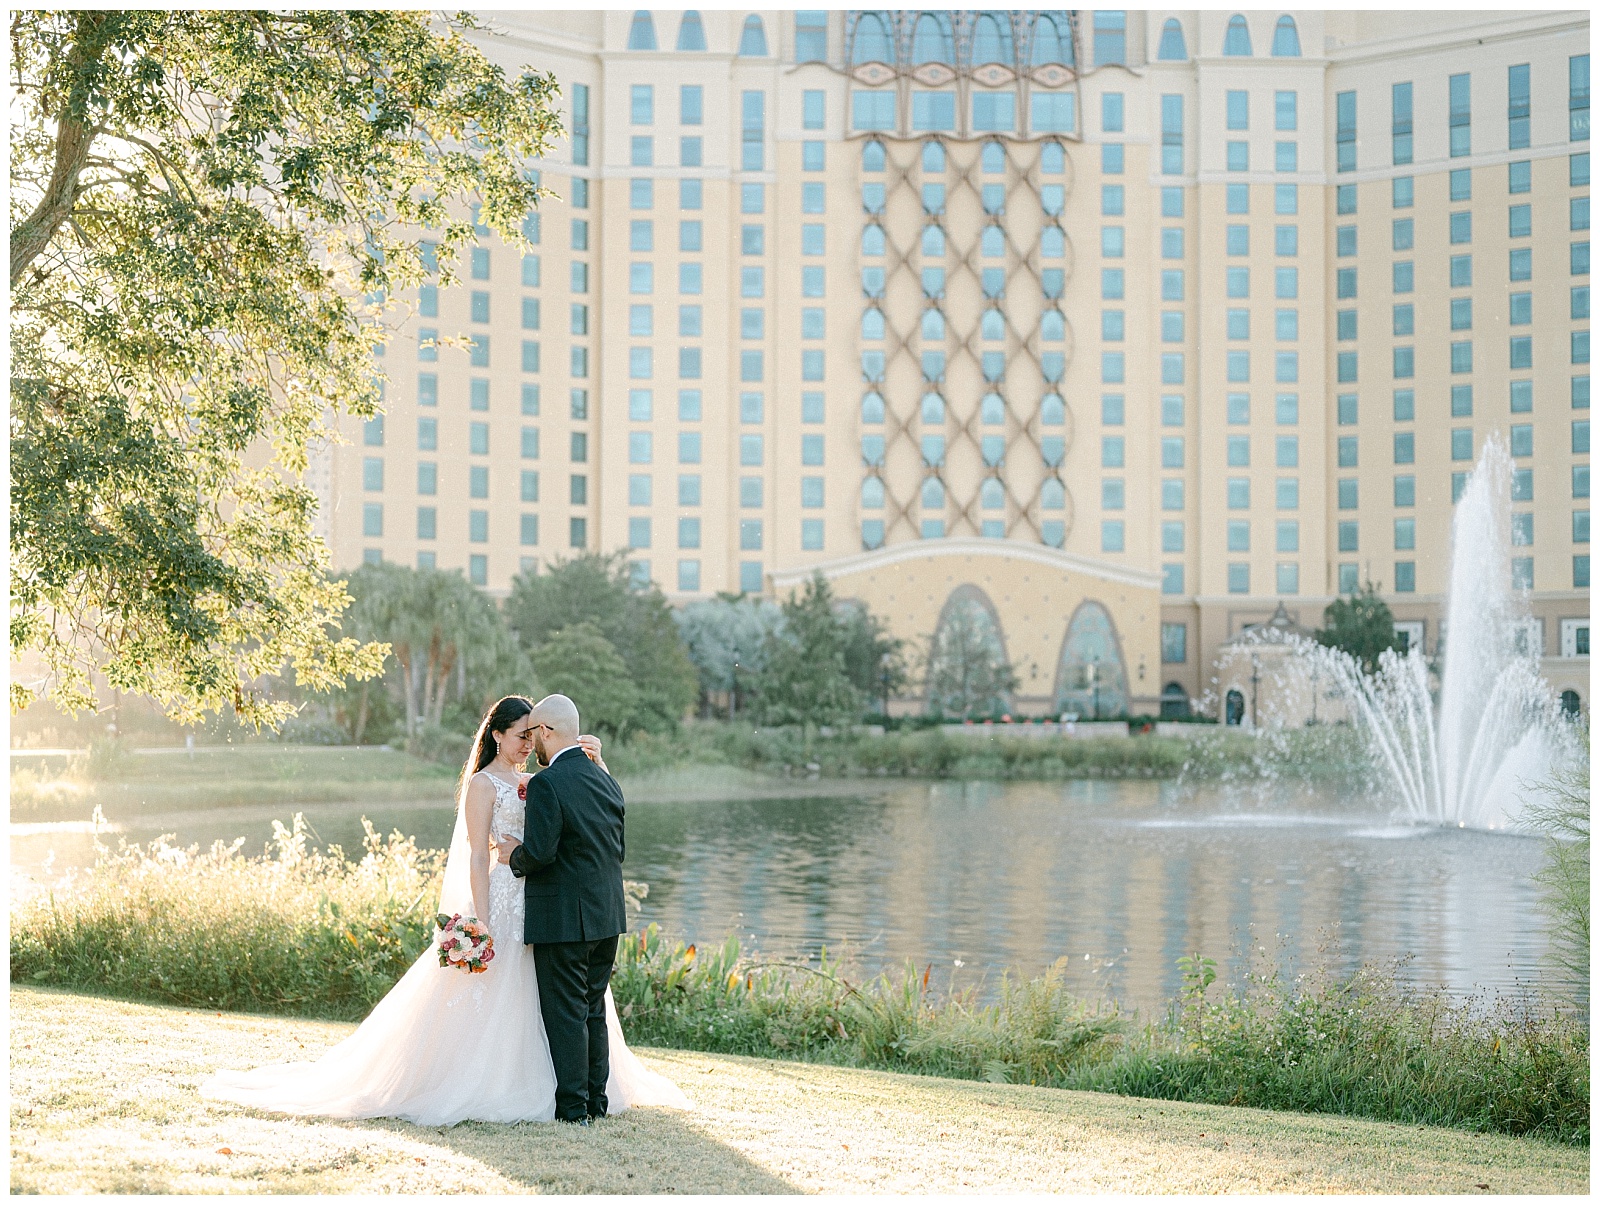 Bride and Groom embrace by Disney's Riviera Resorts Lake by Elizabeth Kane Photography in Orlando Florida